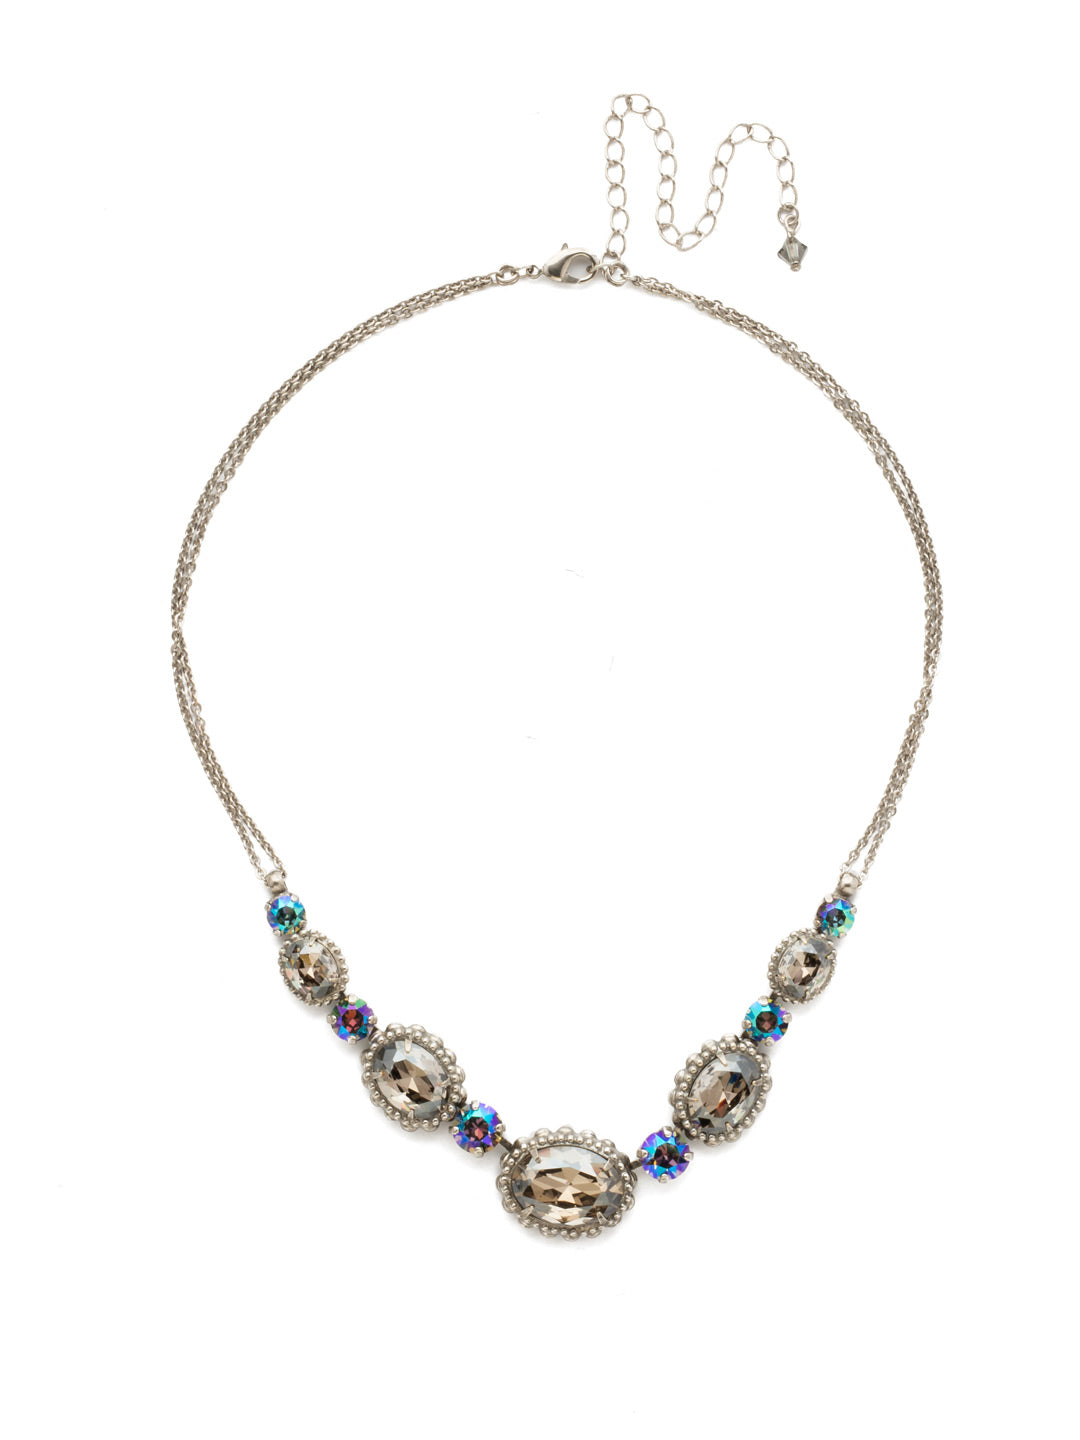 Camellia Necklace - NDQ10ASCRO - A delicate double chain adds subtle detail to this charming style. Five oval crystals with decorative metal edging are highlighted by petite round stones for a dynamic, dazzling look. From Sorrelli's Crystal Rock collection in our Antique Silver-tone finish.